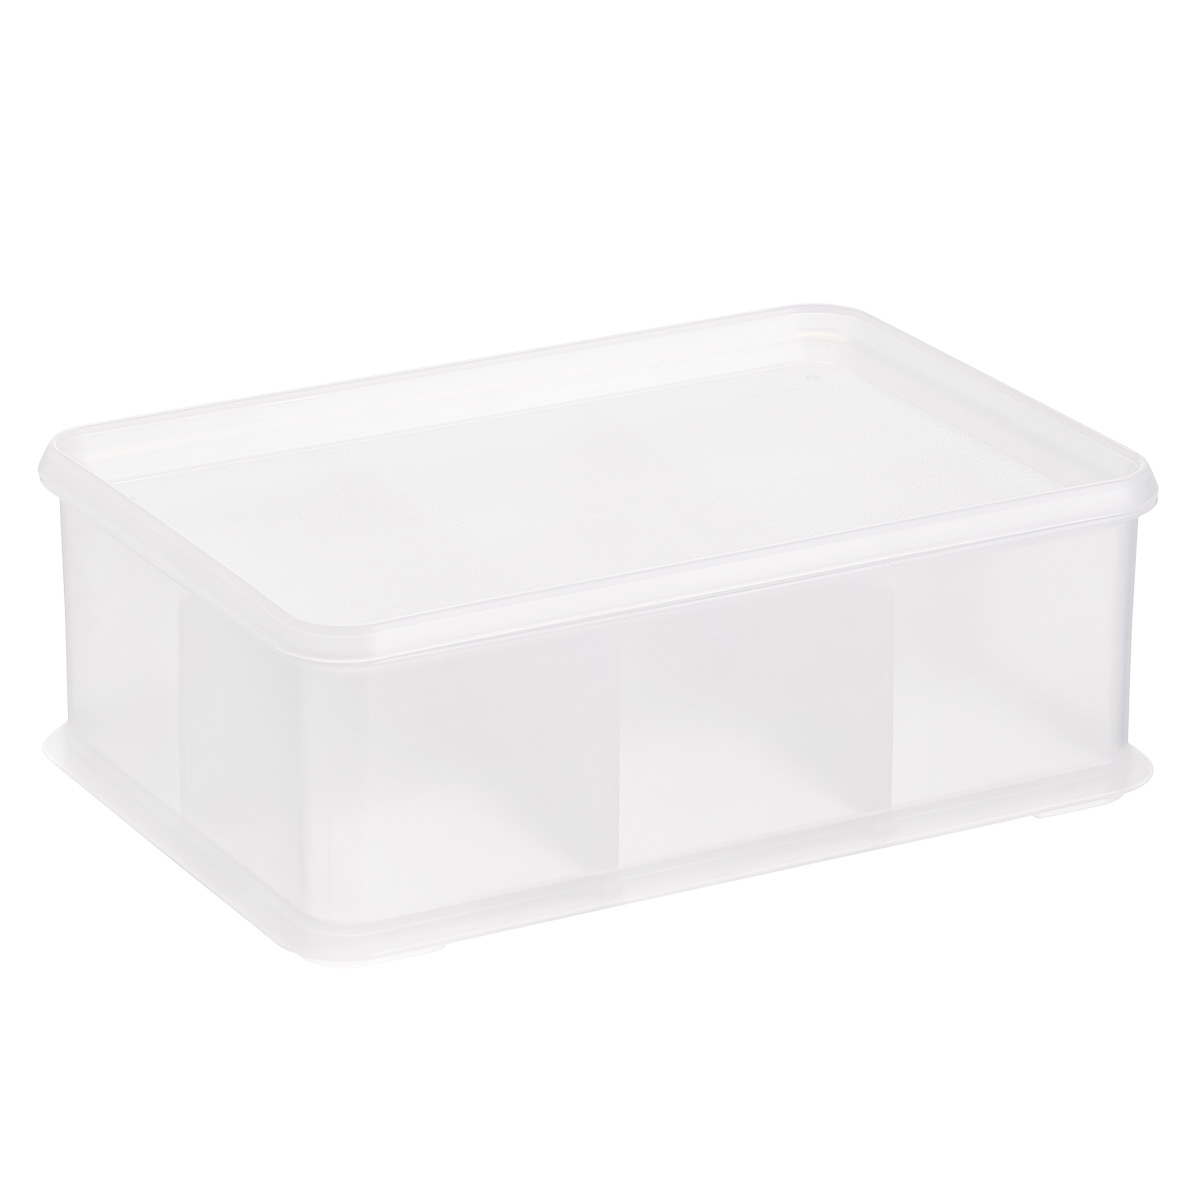 X-Small Shallow Shimo Storage Bin with Lid Translucent